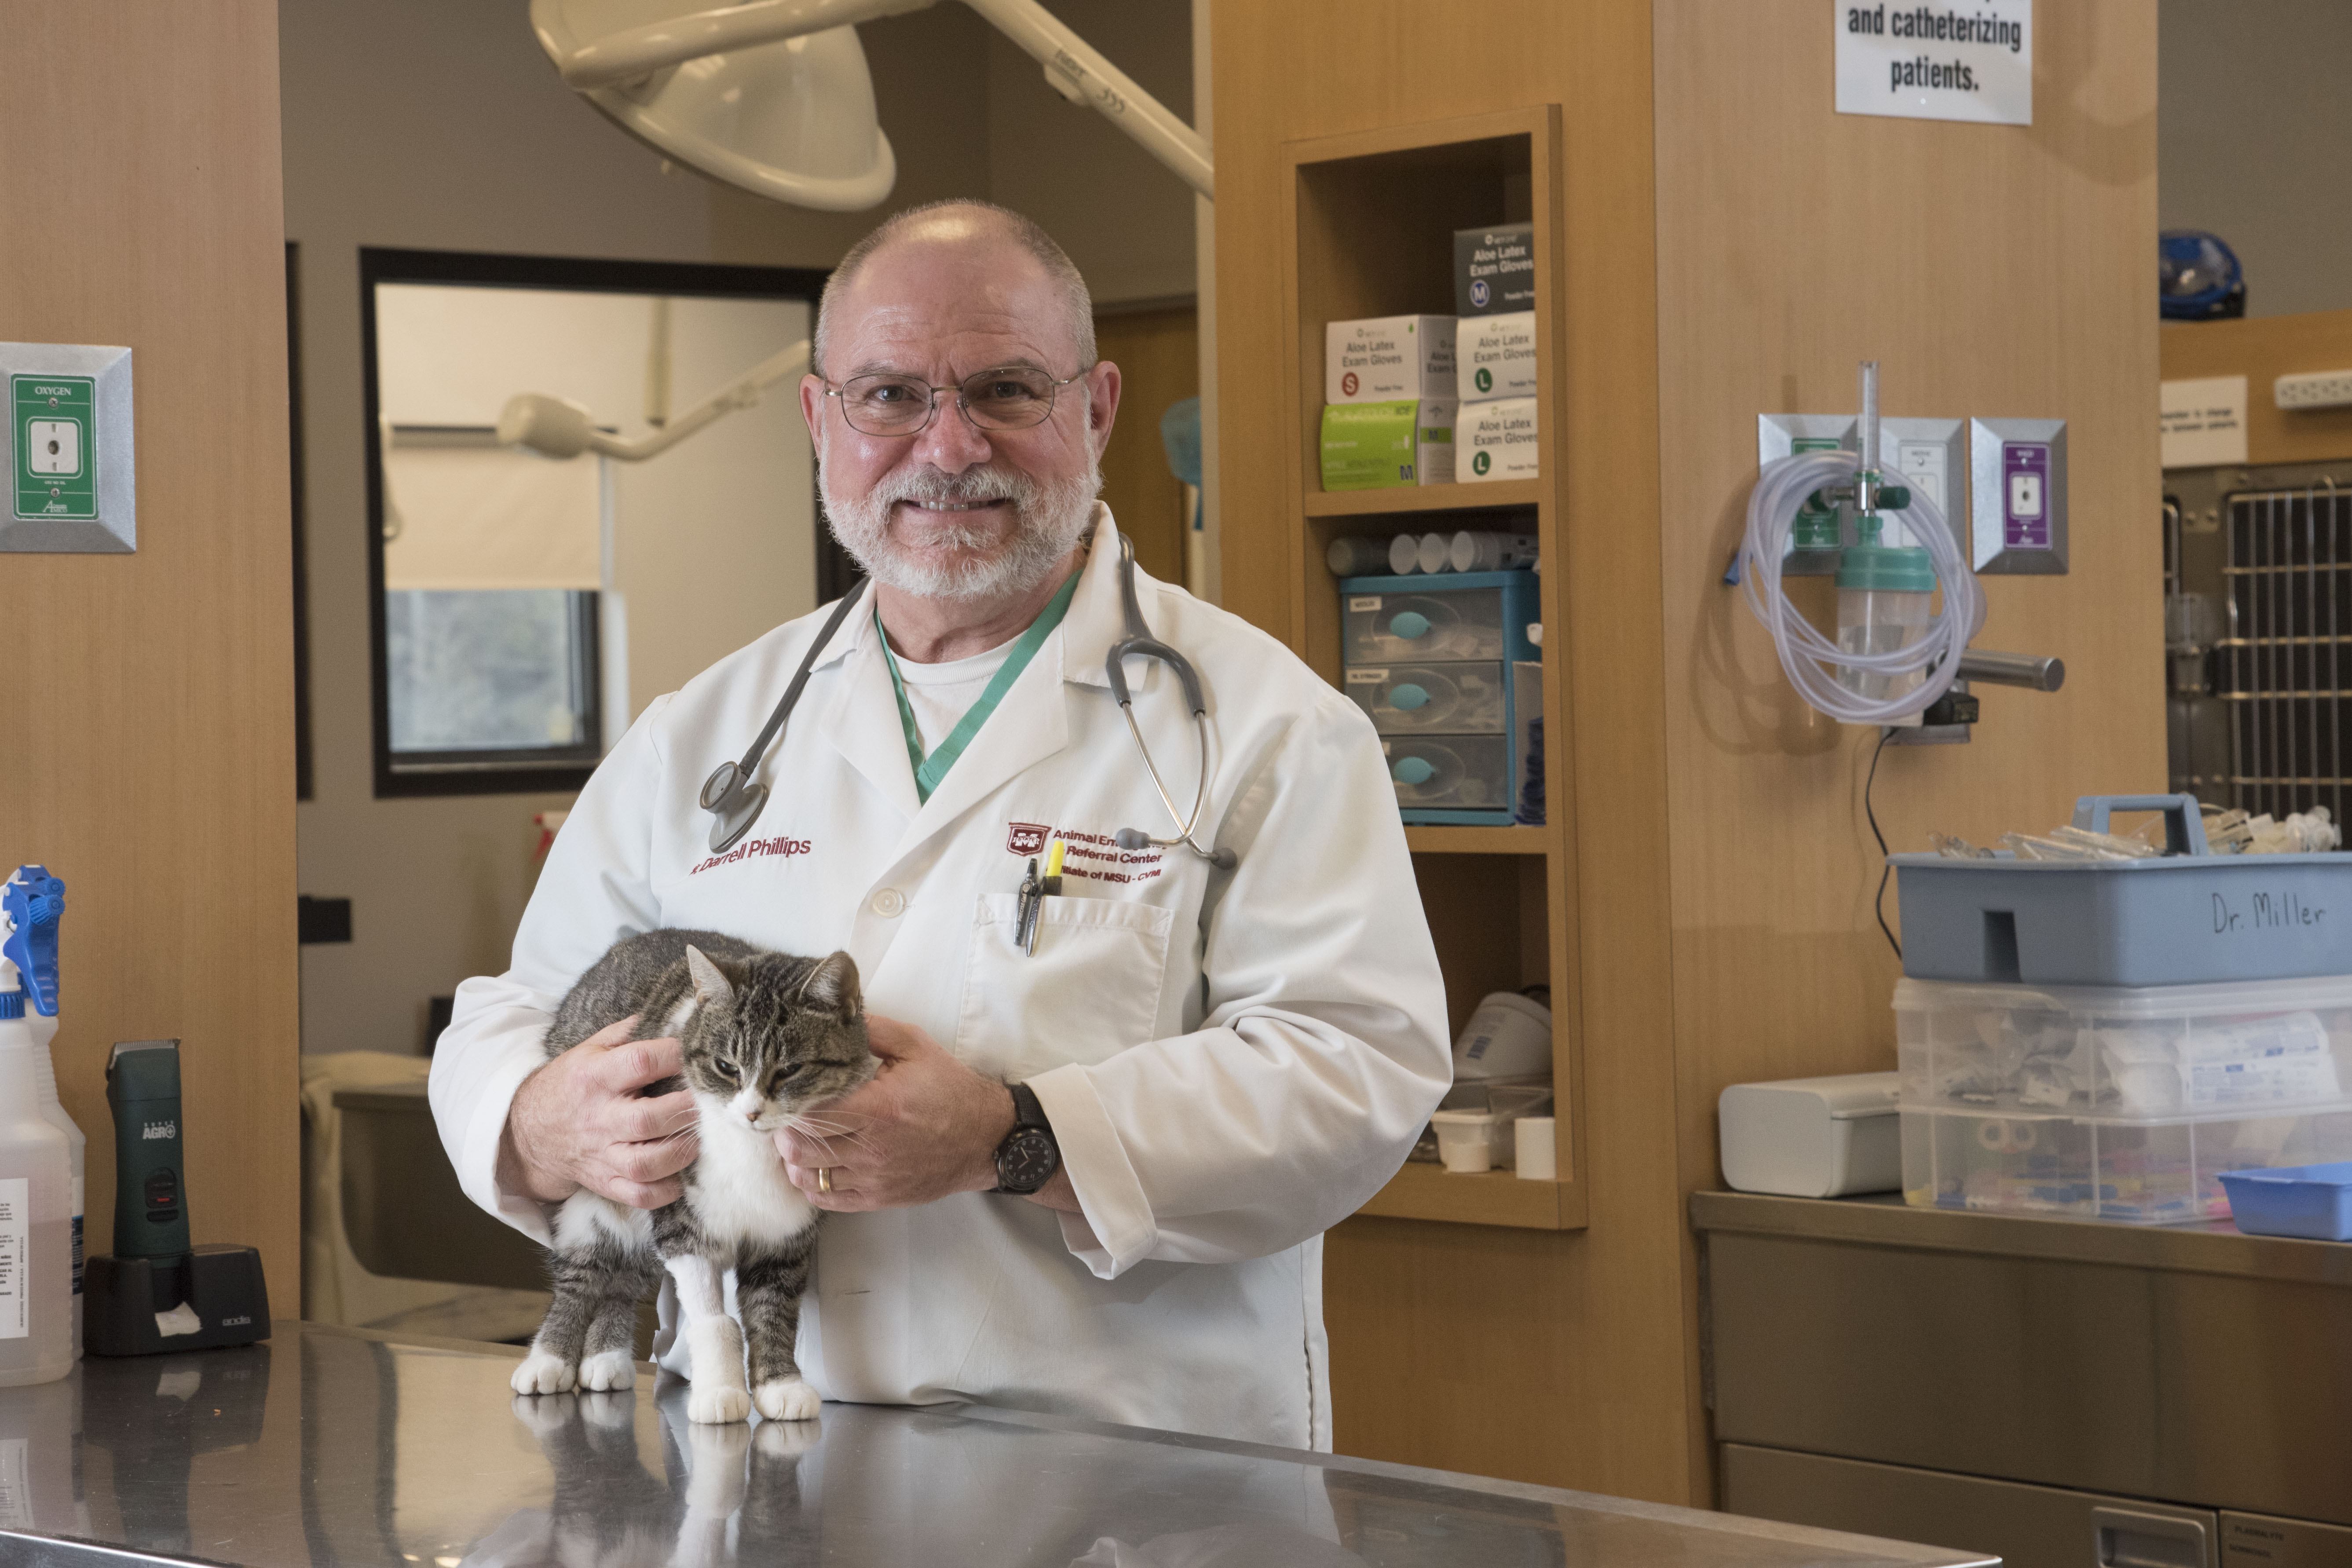 A veterinarian poses with a cat on an exam table